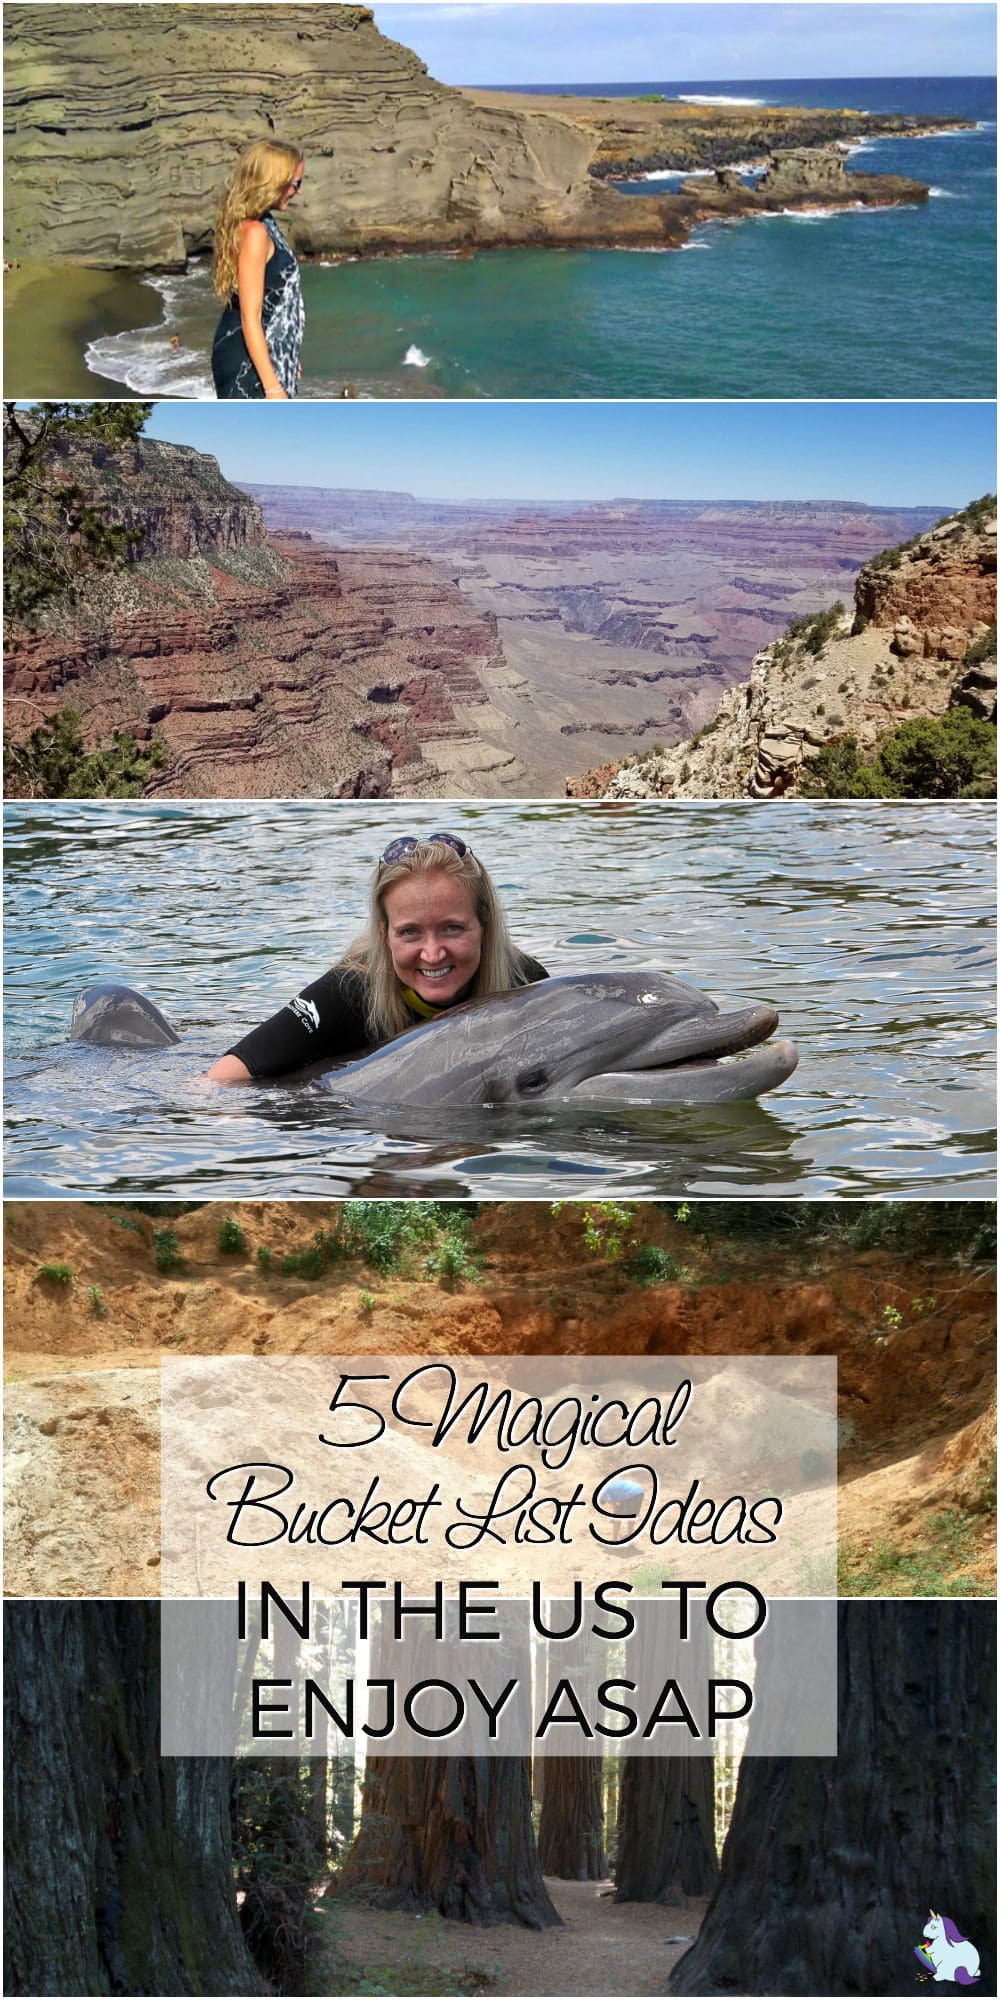 Collage of images from traveling including, mountains, green sand beach, swimming with dolphins, and trees. 